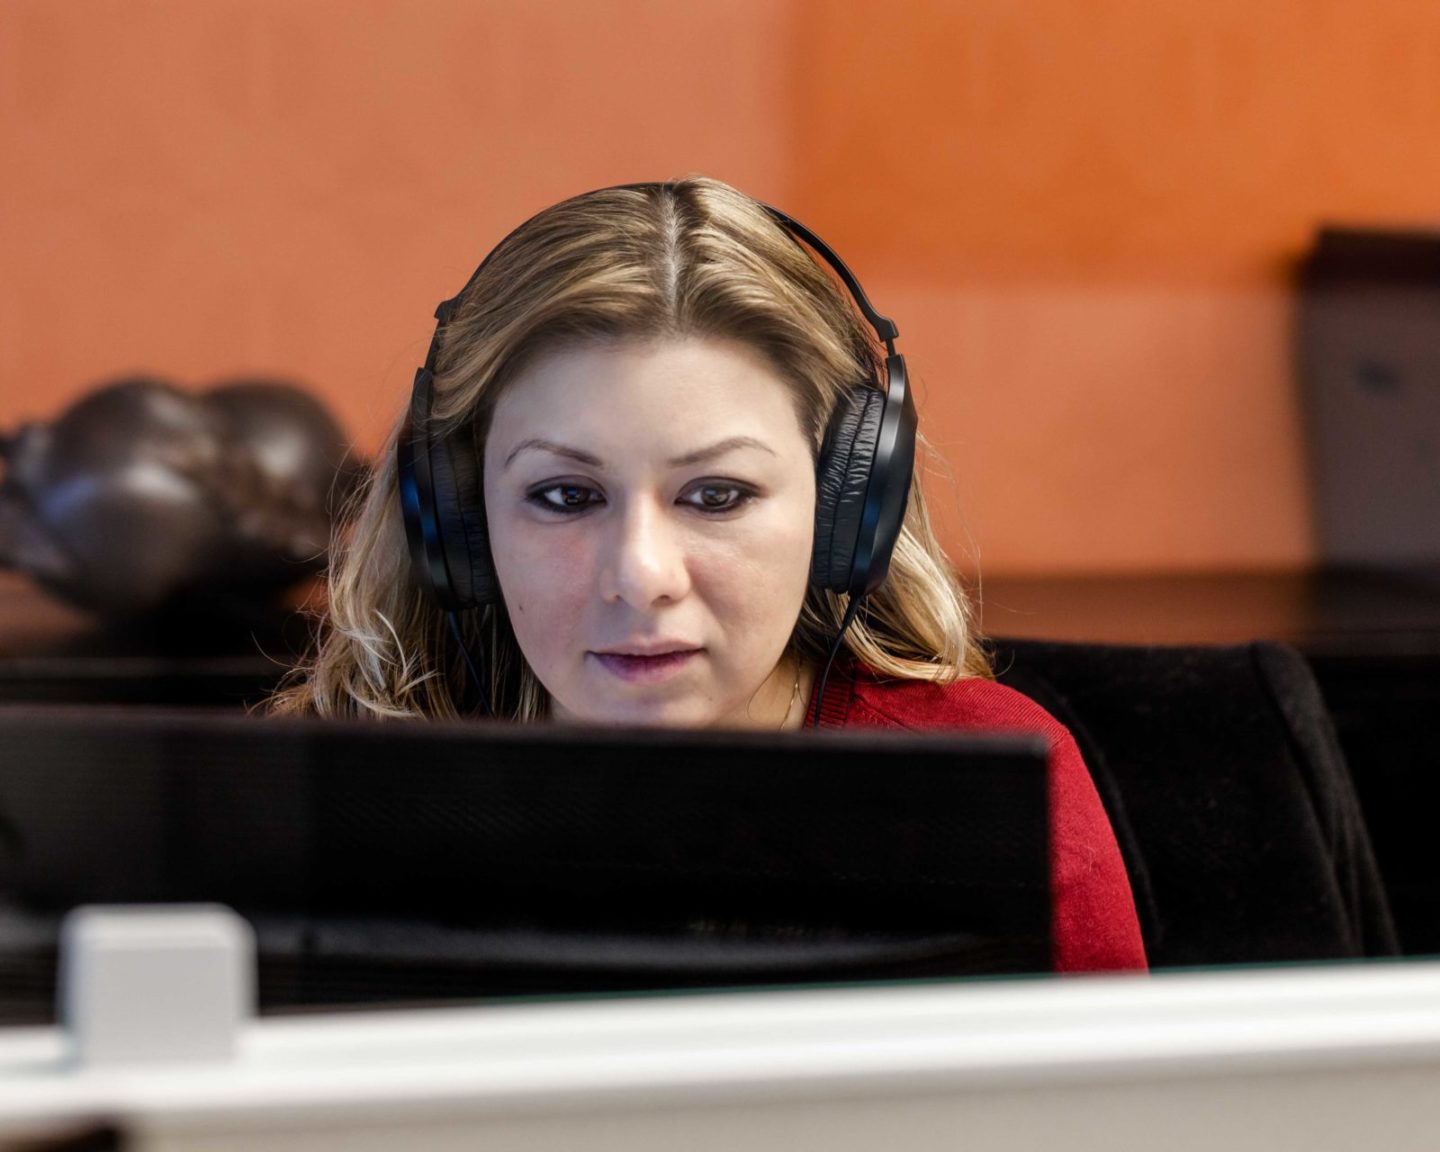 contact center agent with blonde hair completing a training